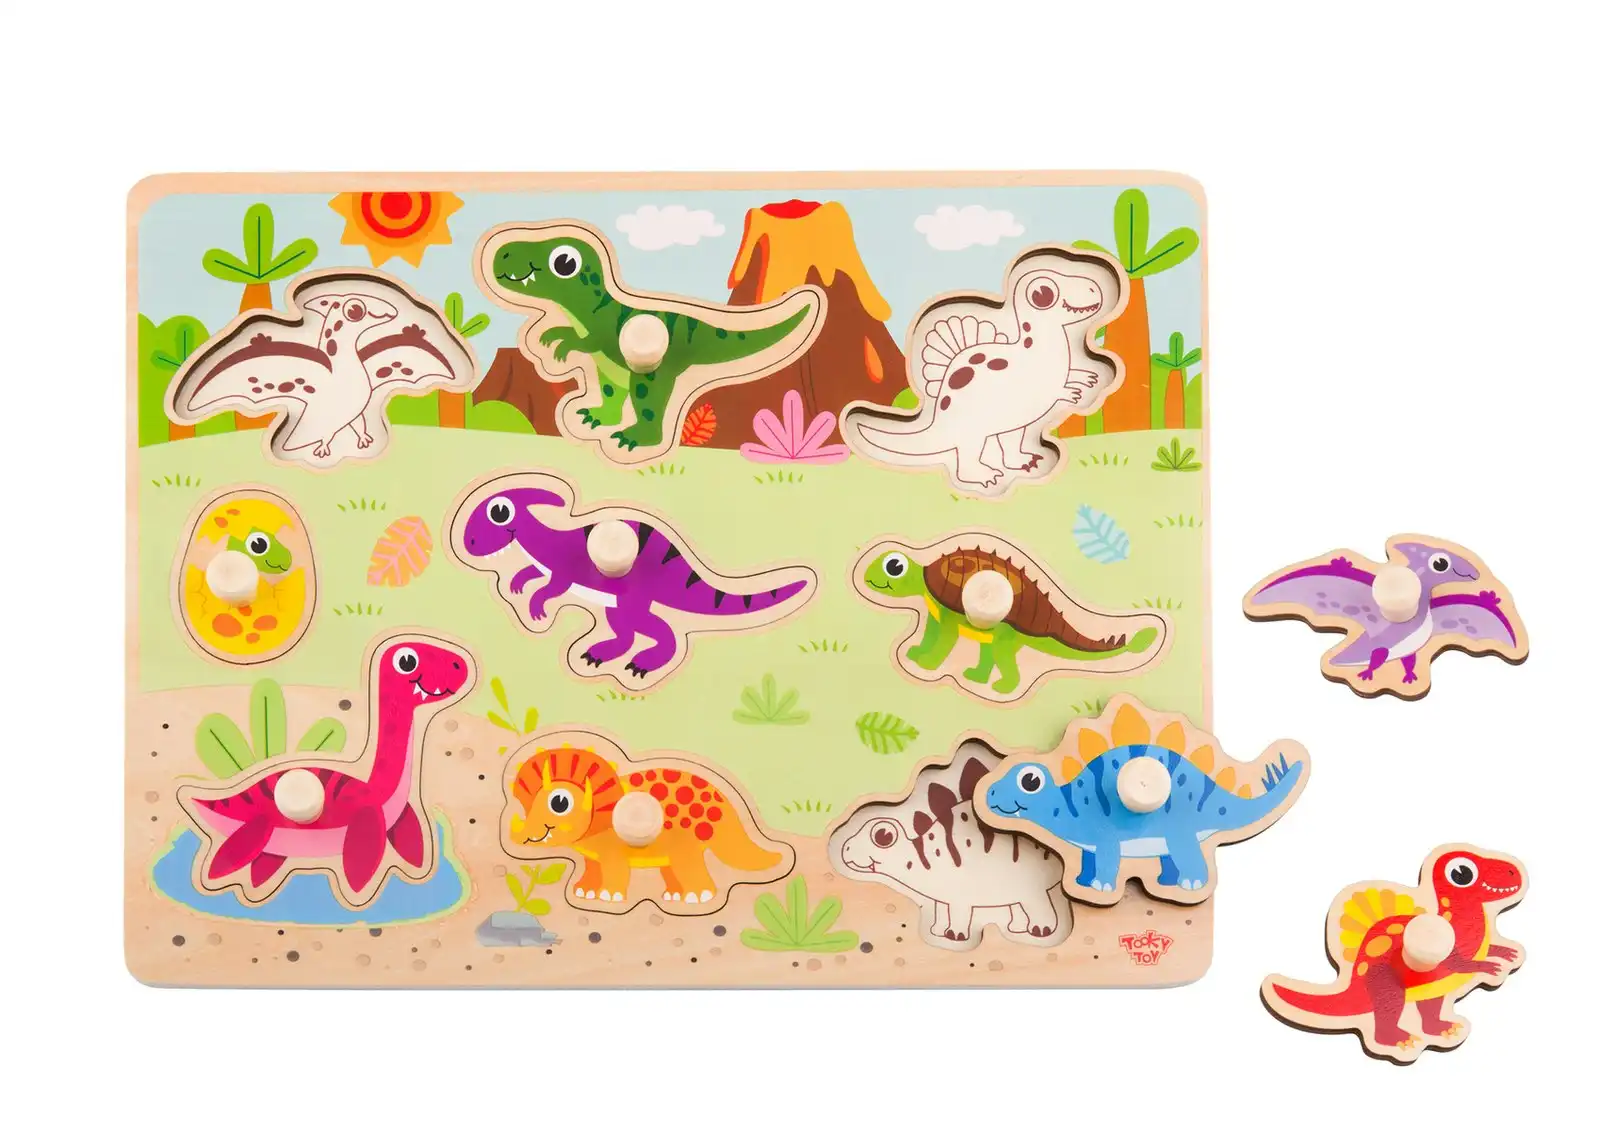 Tooky Toy Wooden Dinosaur Peg Kids/Toddler Learning Play 30cm Puzzle Board 18m+